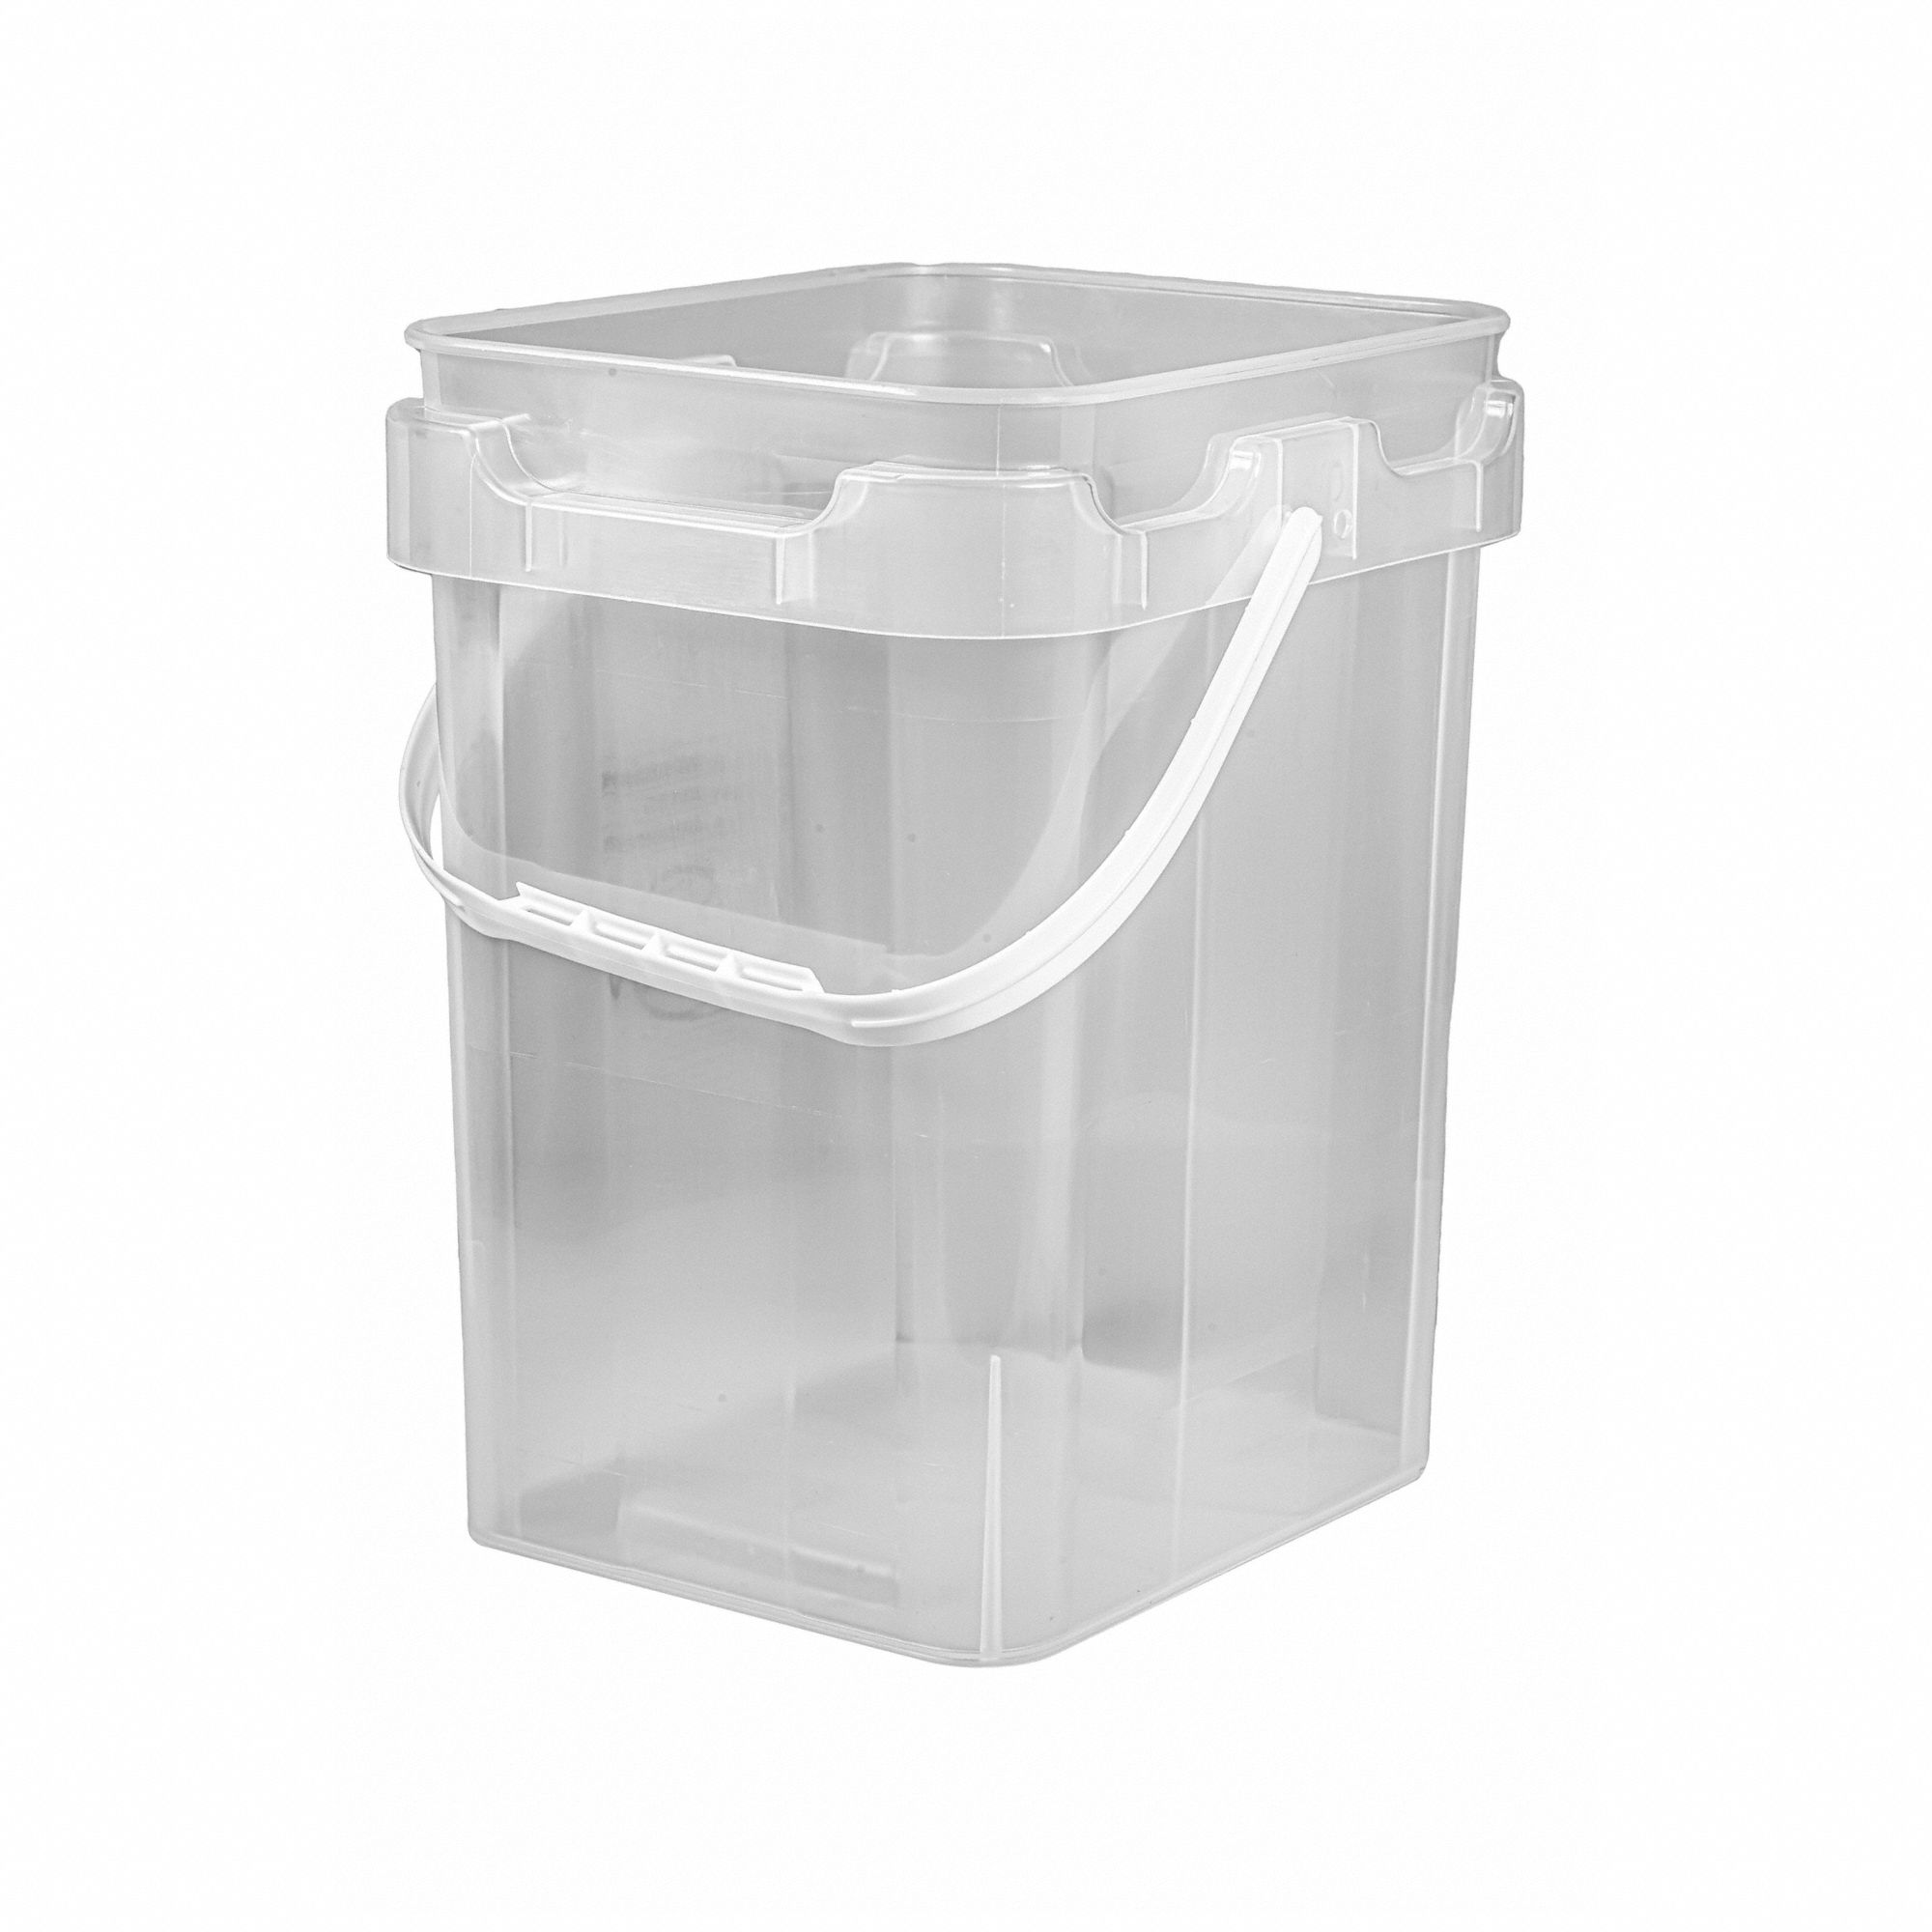 Pail: 2 gal, Open Head, Plastic, 7 1/2 in, 11 in Overall Ht, Square, Clear, FDA Certified